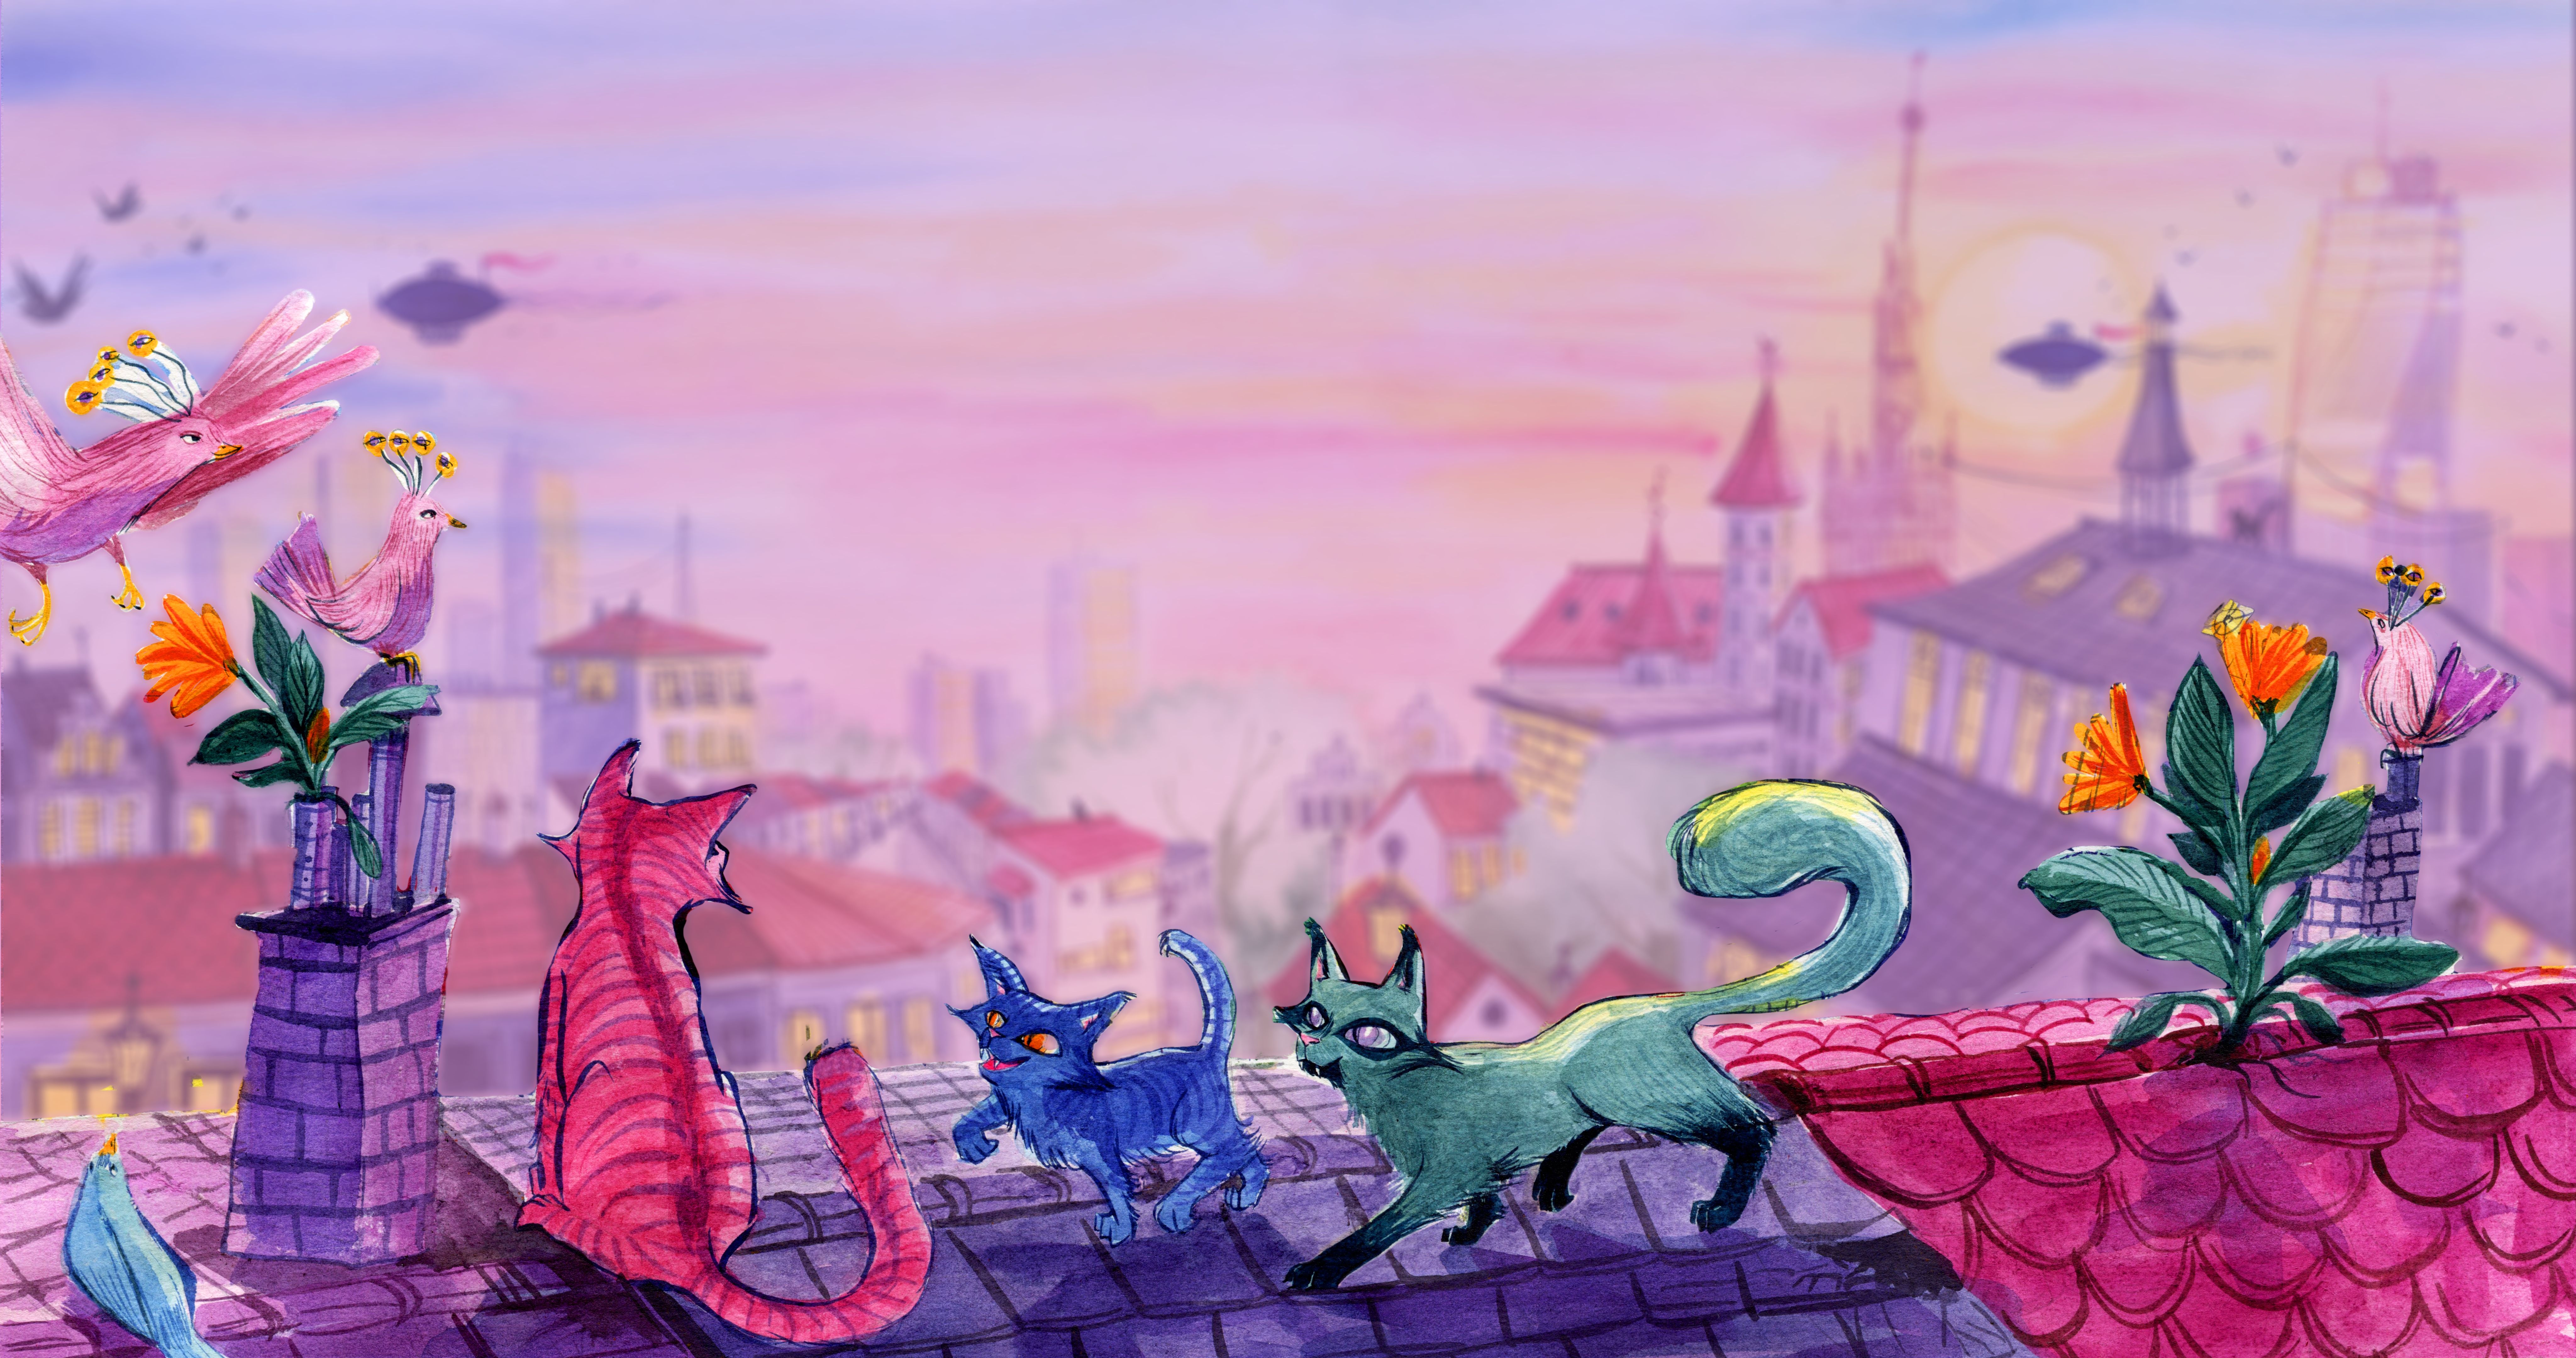 The same illustration as described in the original one, above, but with the background blurred and with a pink to purple gradient applied to the background.